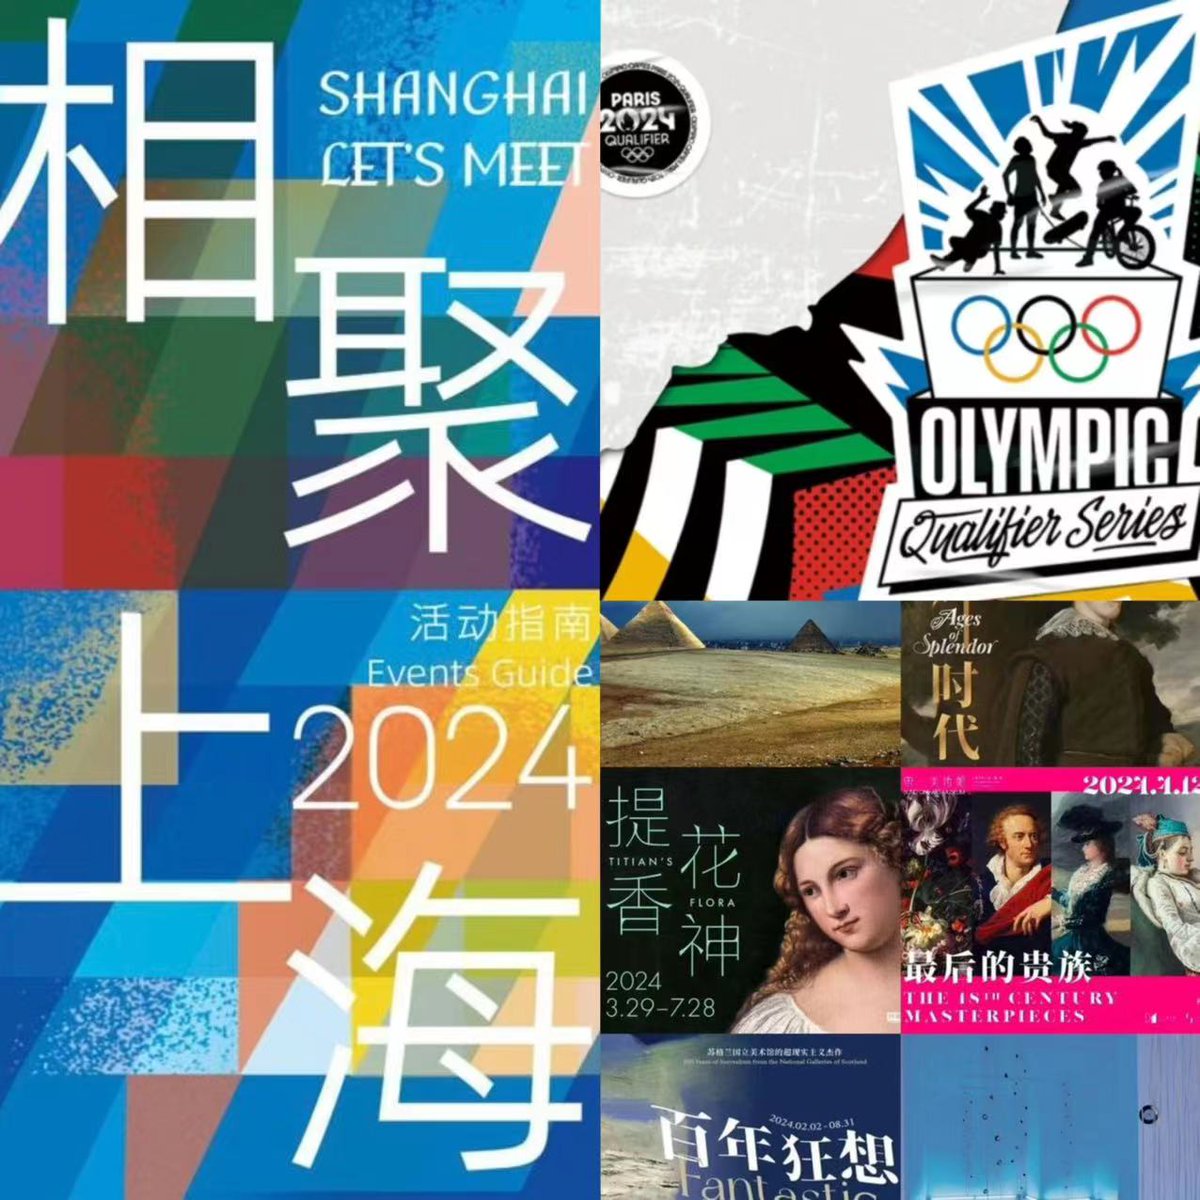 📝Weekly service wrap-up

🗓️2024 Shanghai Events Guide: bit.ly/49unkgc
🛹Olympic Qualifier Series schedule: bit.ly/3VQVdof
🖼️Exhibitions by world-famous museums: bit.ly/43T8MFJ

#InShanghai #ShanghaiTips #ShanghaiTrip